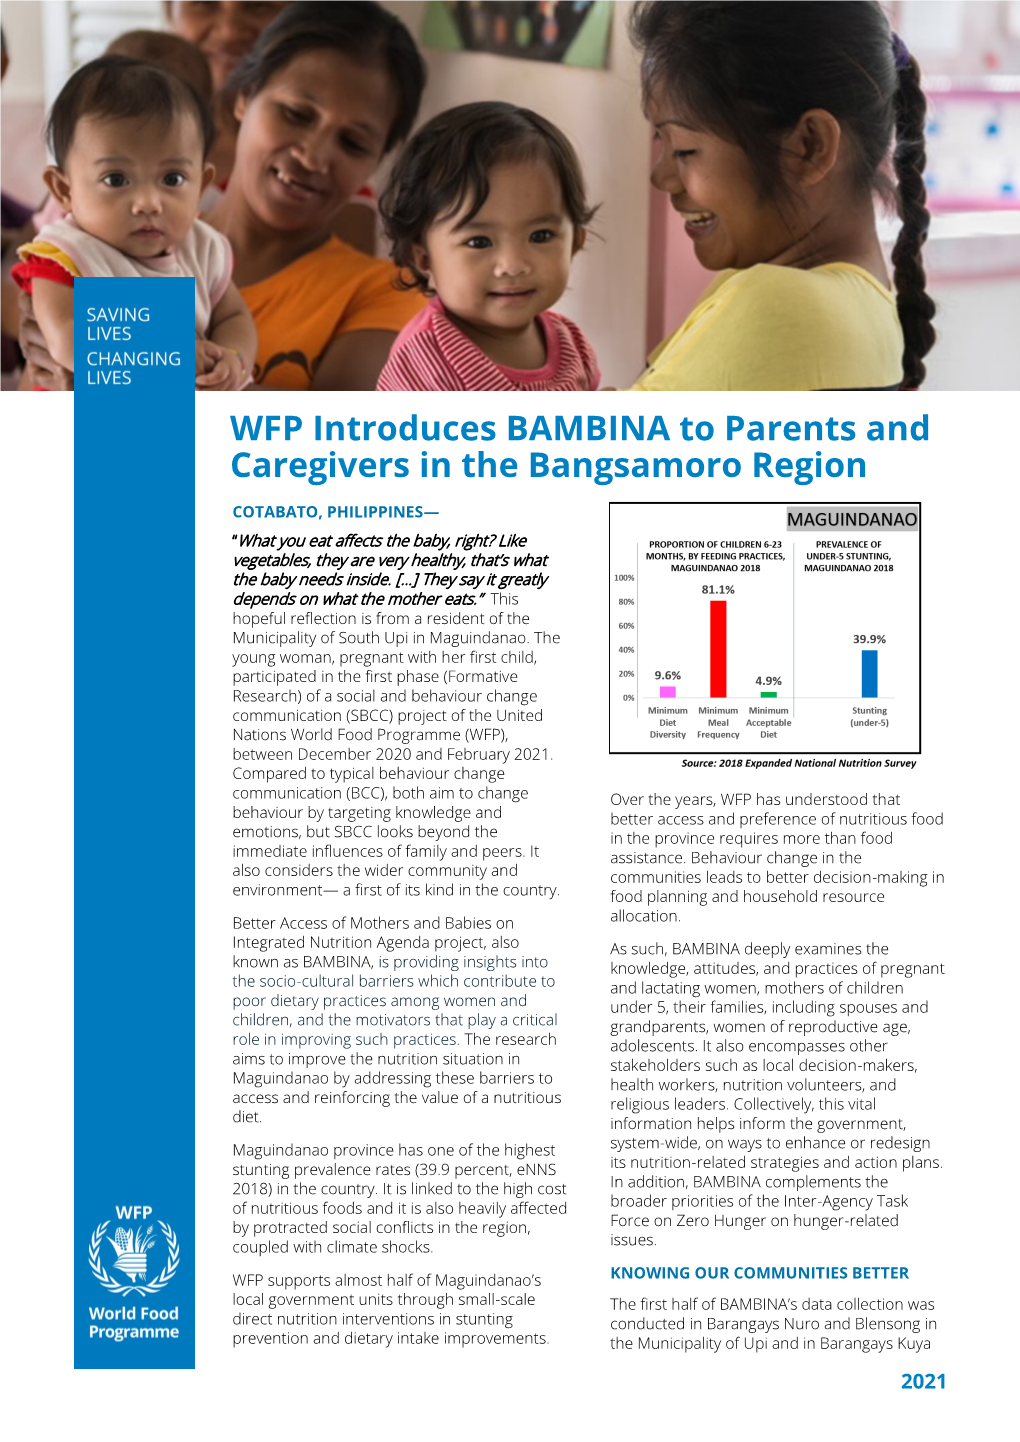 WFP Introduces BAMBINA to Parents and Caregivers in the Bangsamoro Region